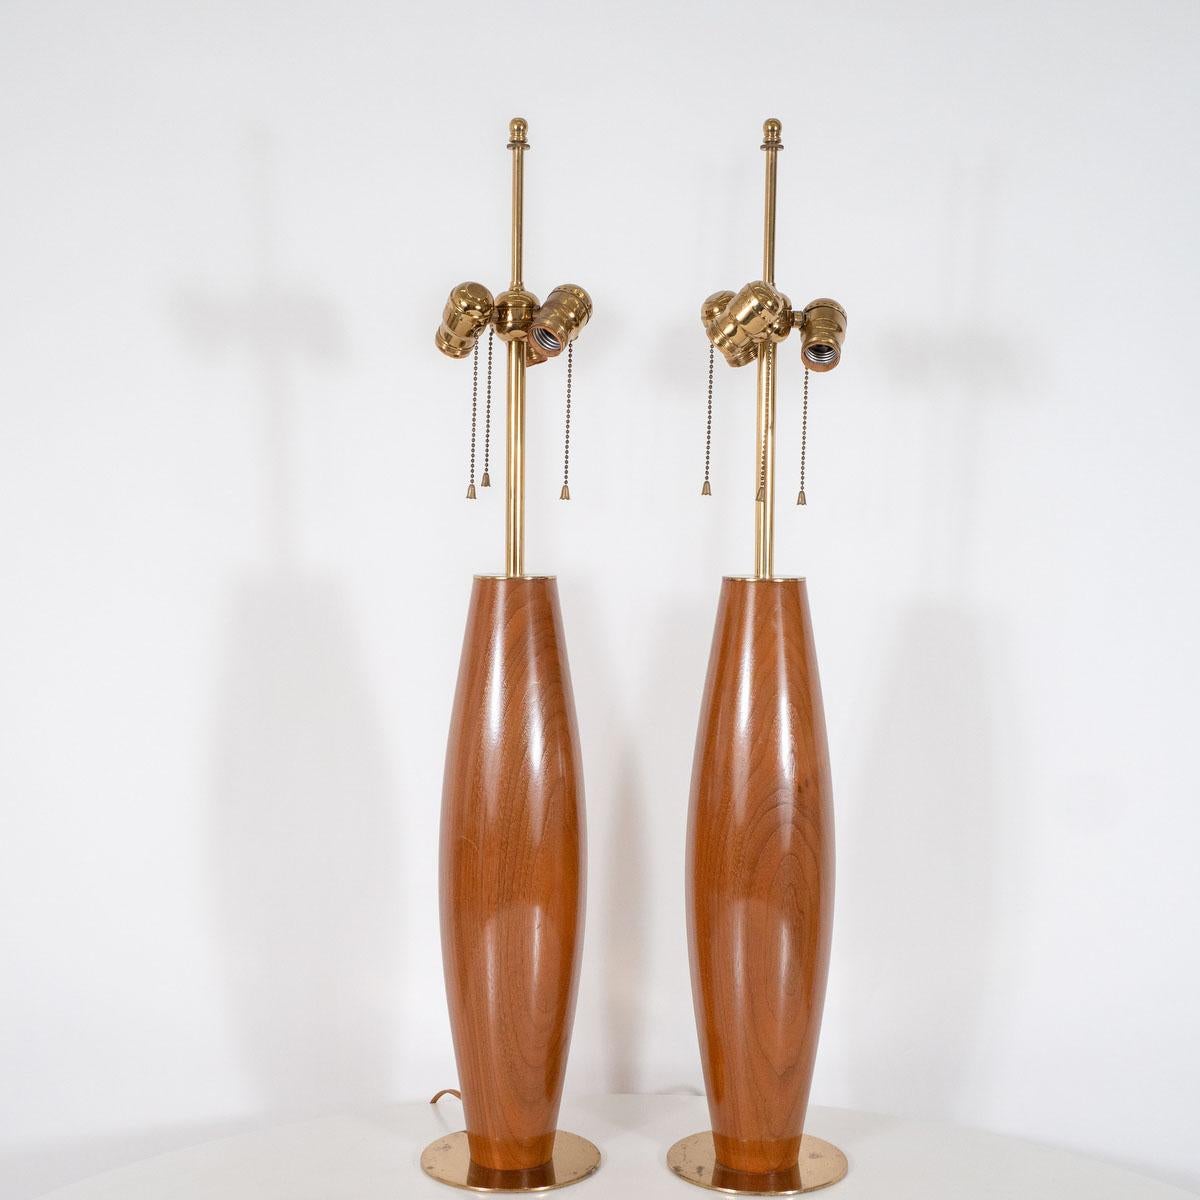 Pair of walnut table lamps with brass hardware by Stewart Ross James for Hansen.